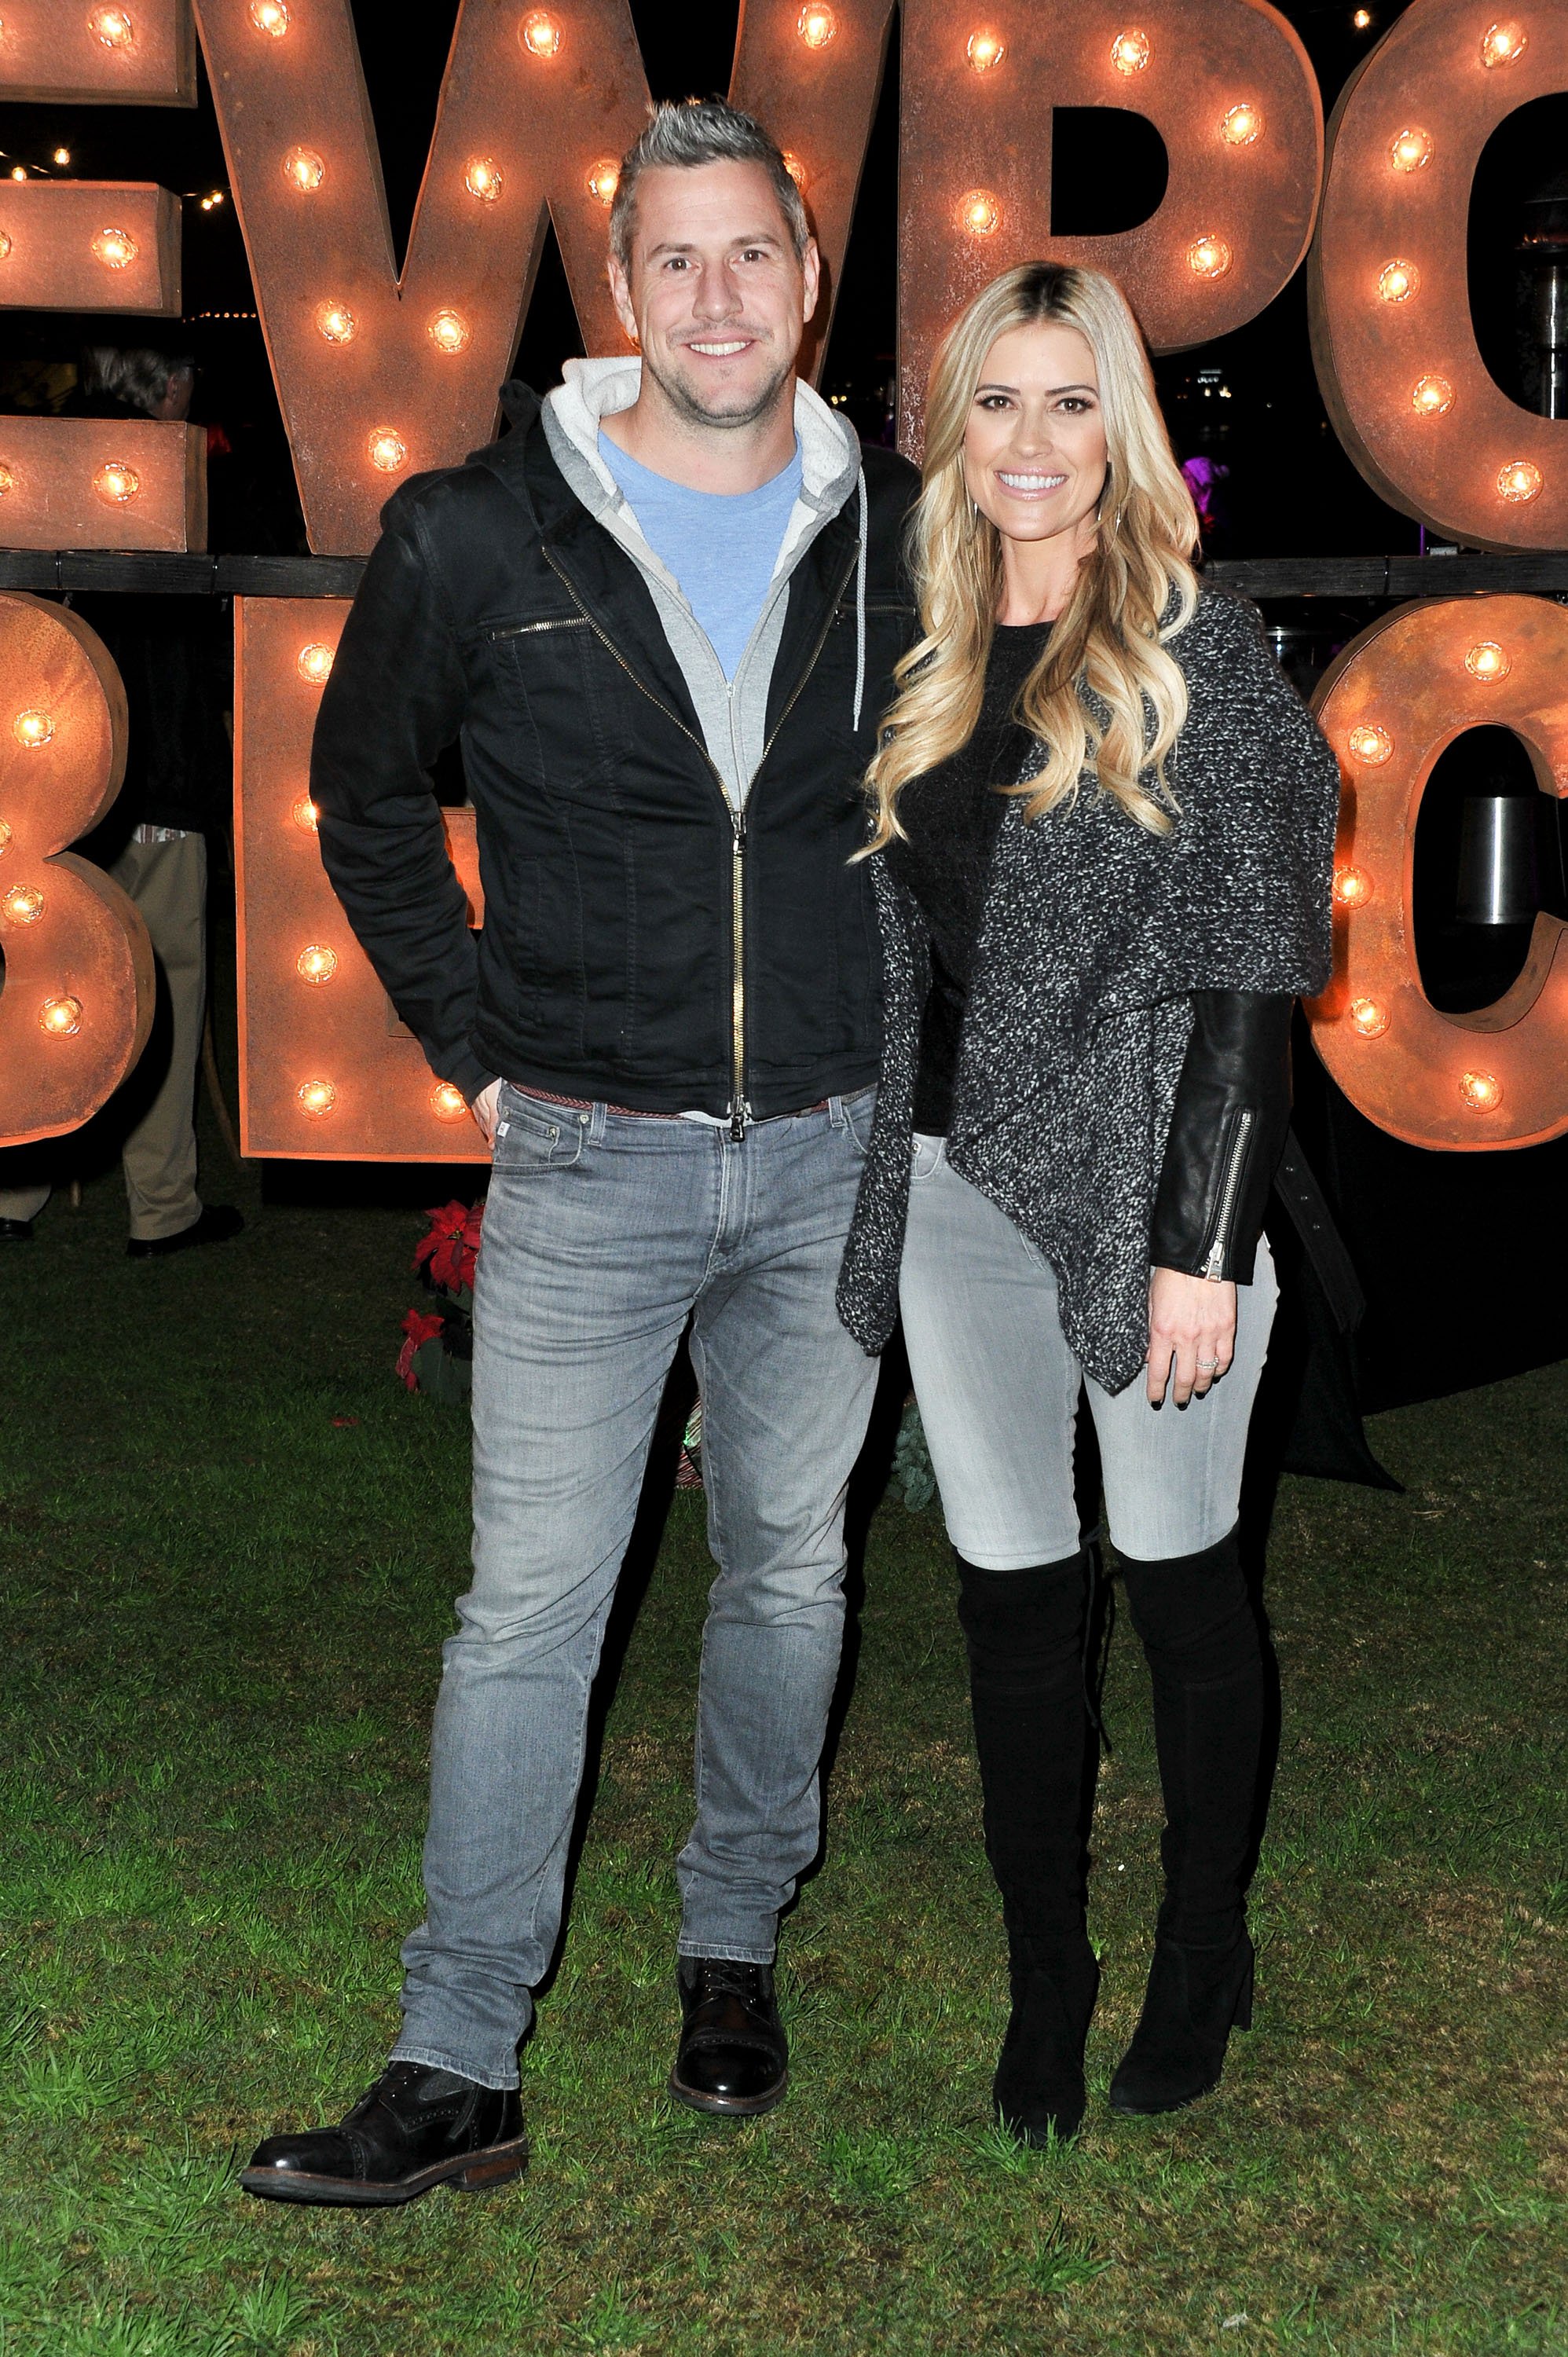 Christina Anstead and Ant Anstead attend the 111th Annual Newport Beach Christmas Boat Parade opening night on December 18, 2019, in Newport Beach, California. | Source: Getty Images.